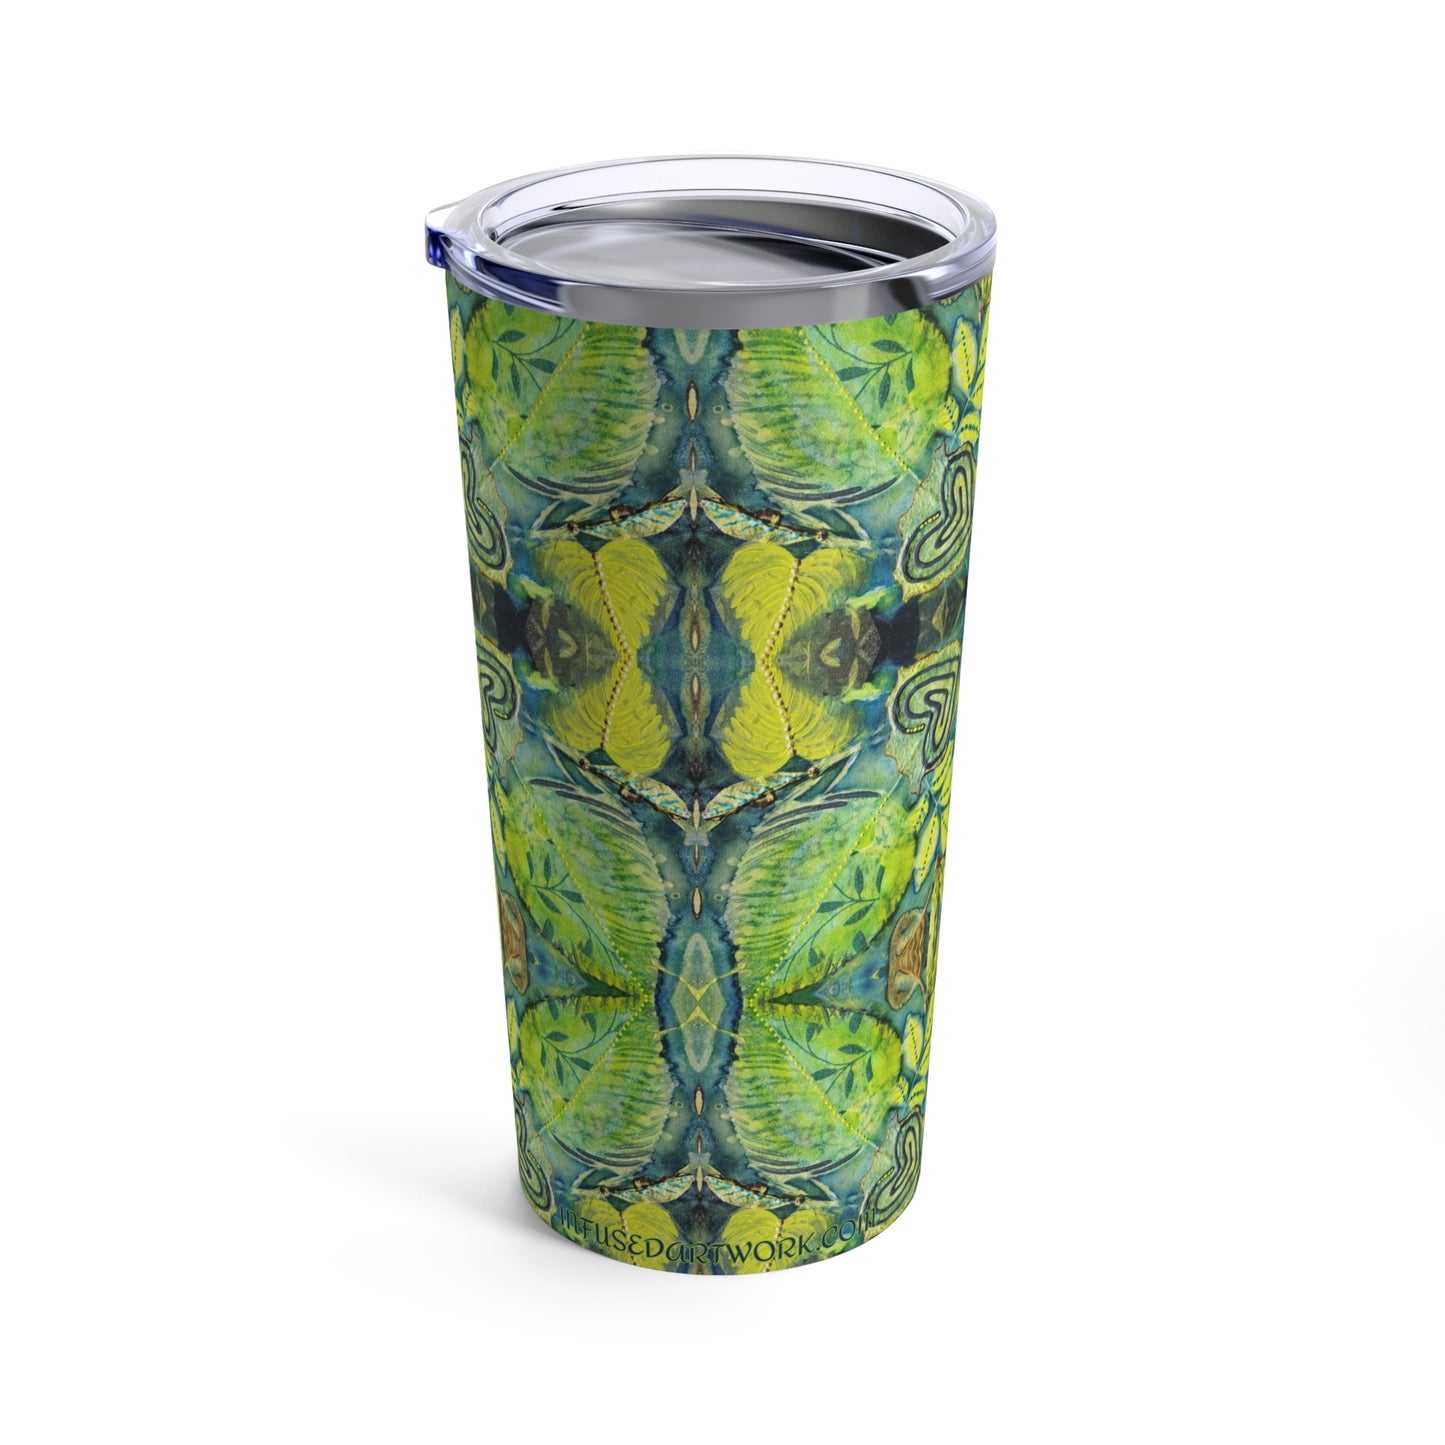 Beauty Abounds -Stainless Steel Coffee Tumbler